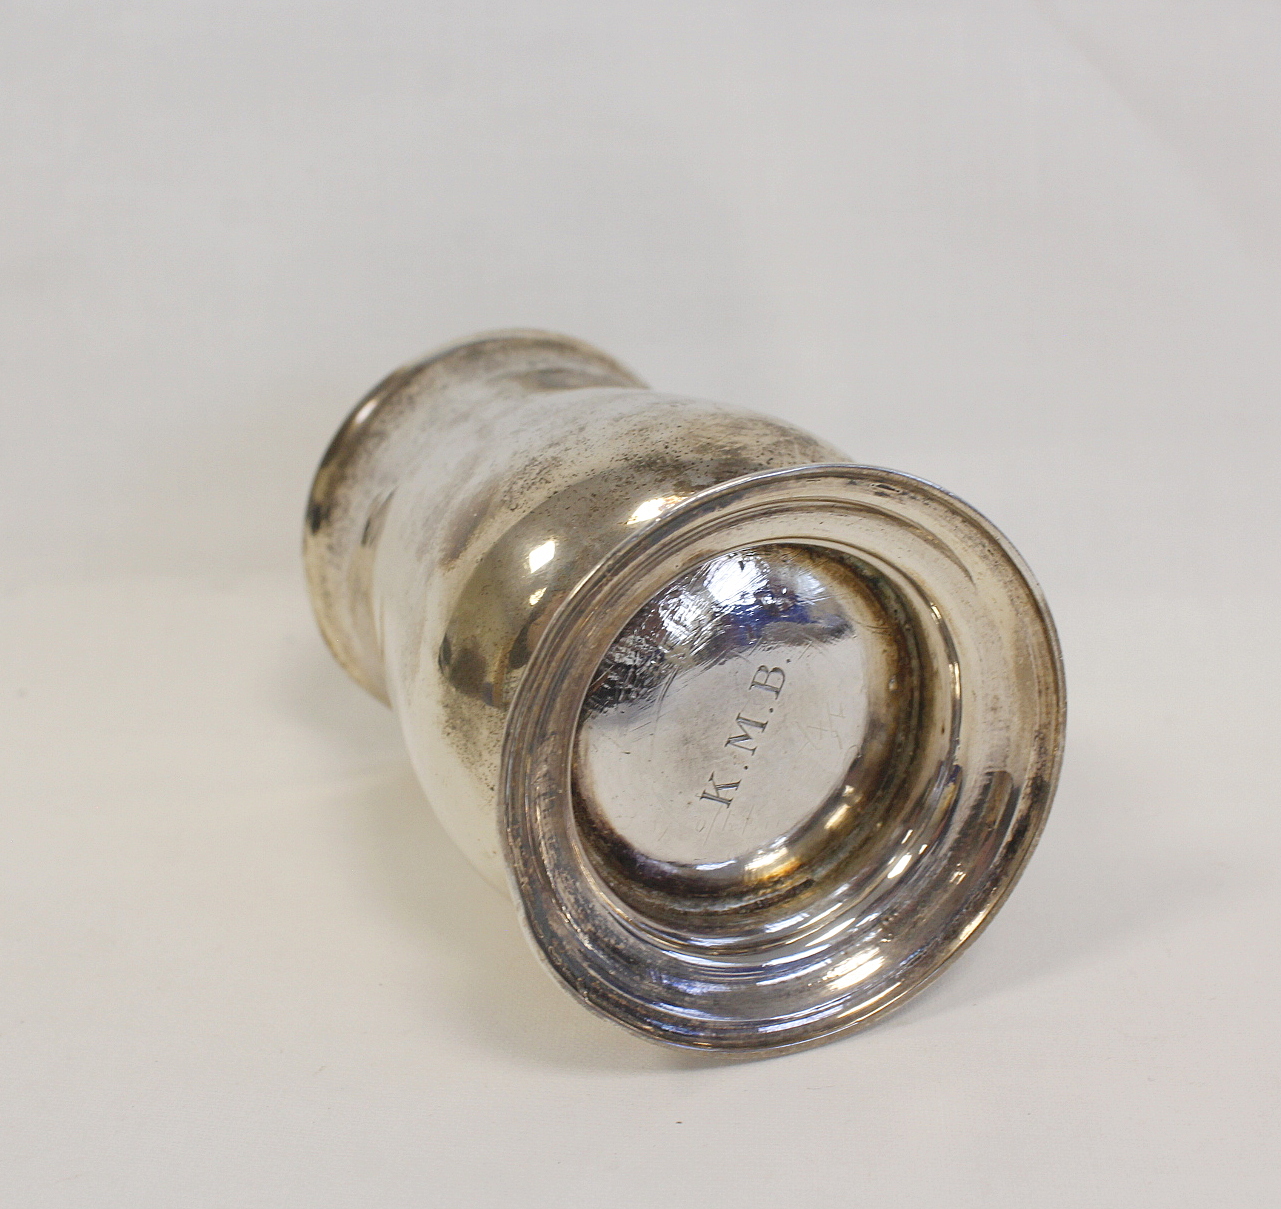 Silver baluster christening mug with scroll handle on moulded foot, initialled Maker P.B? 1797. - Image 2 of 3